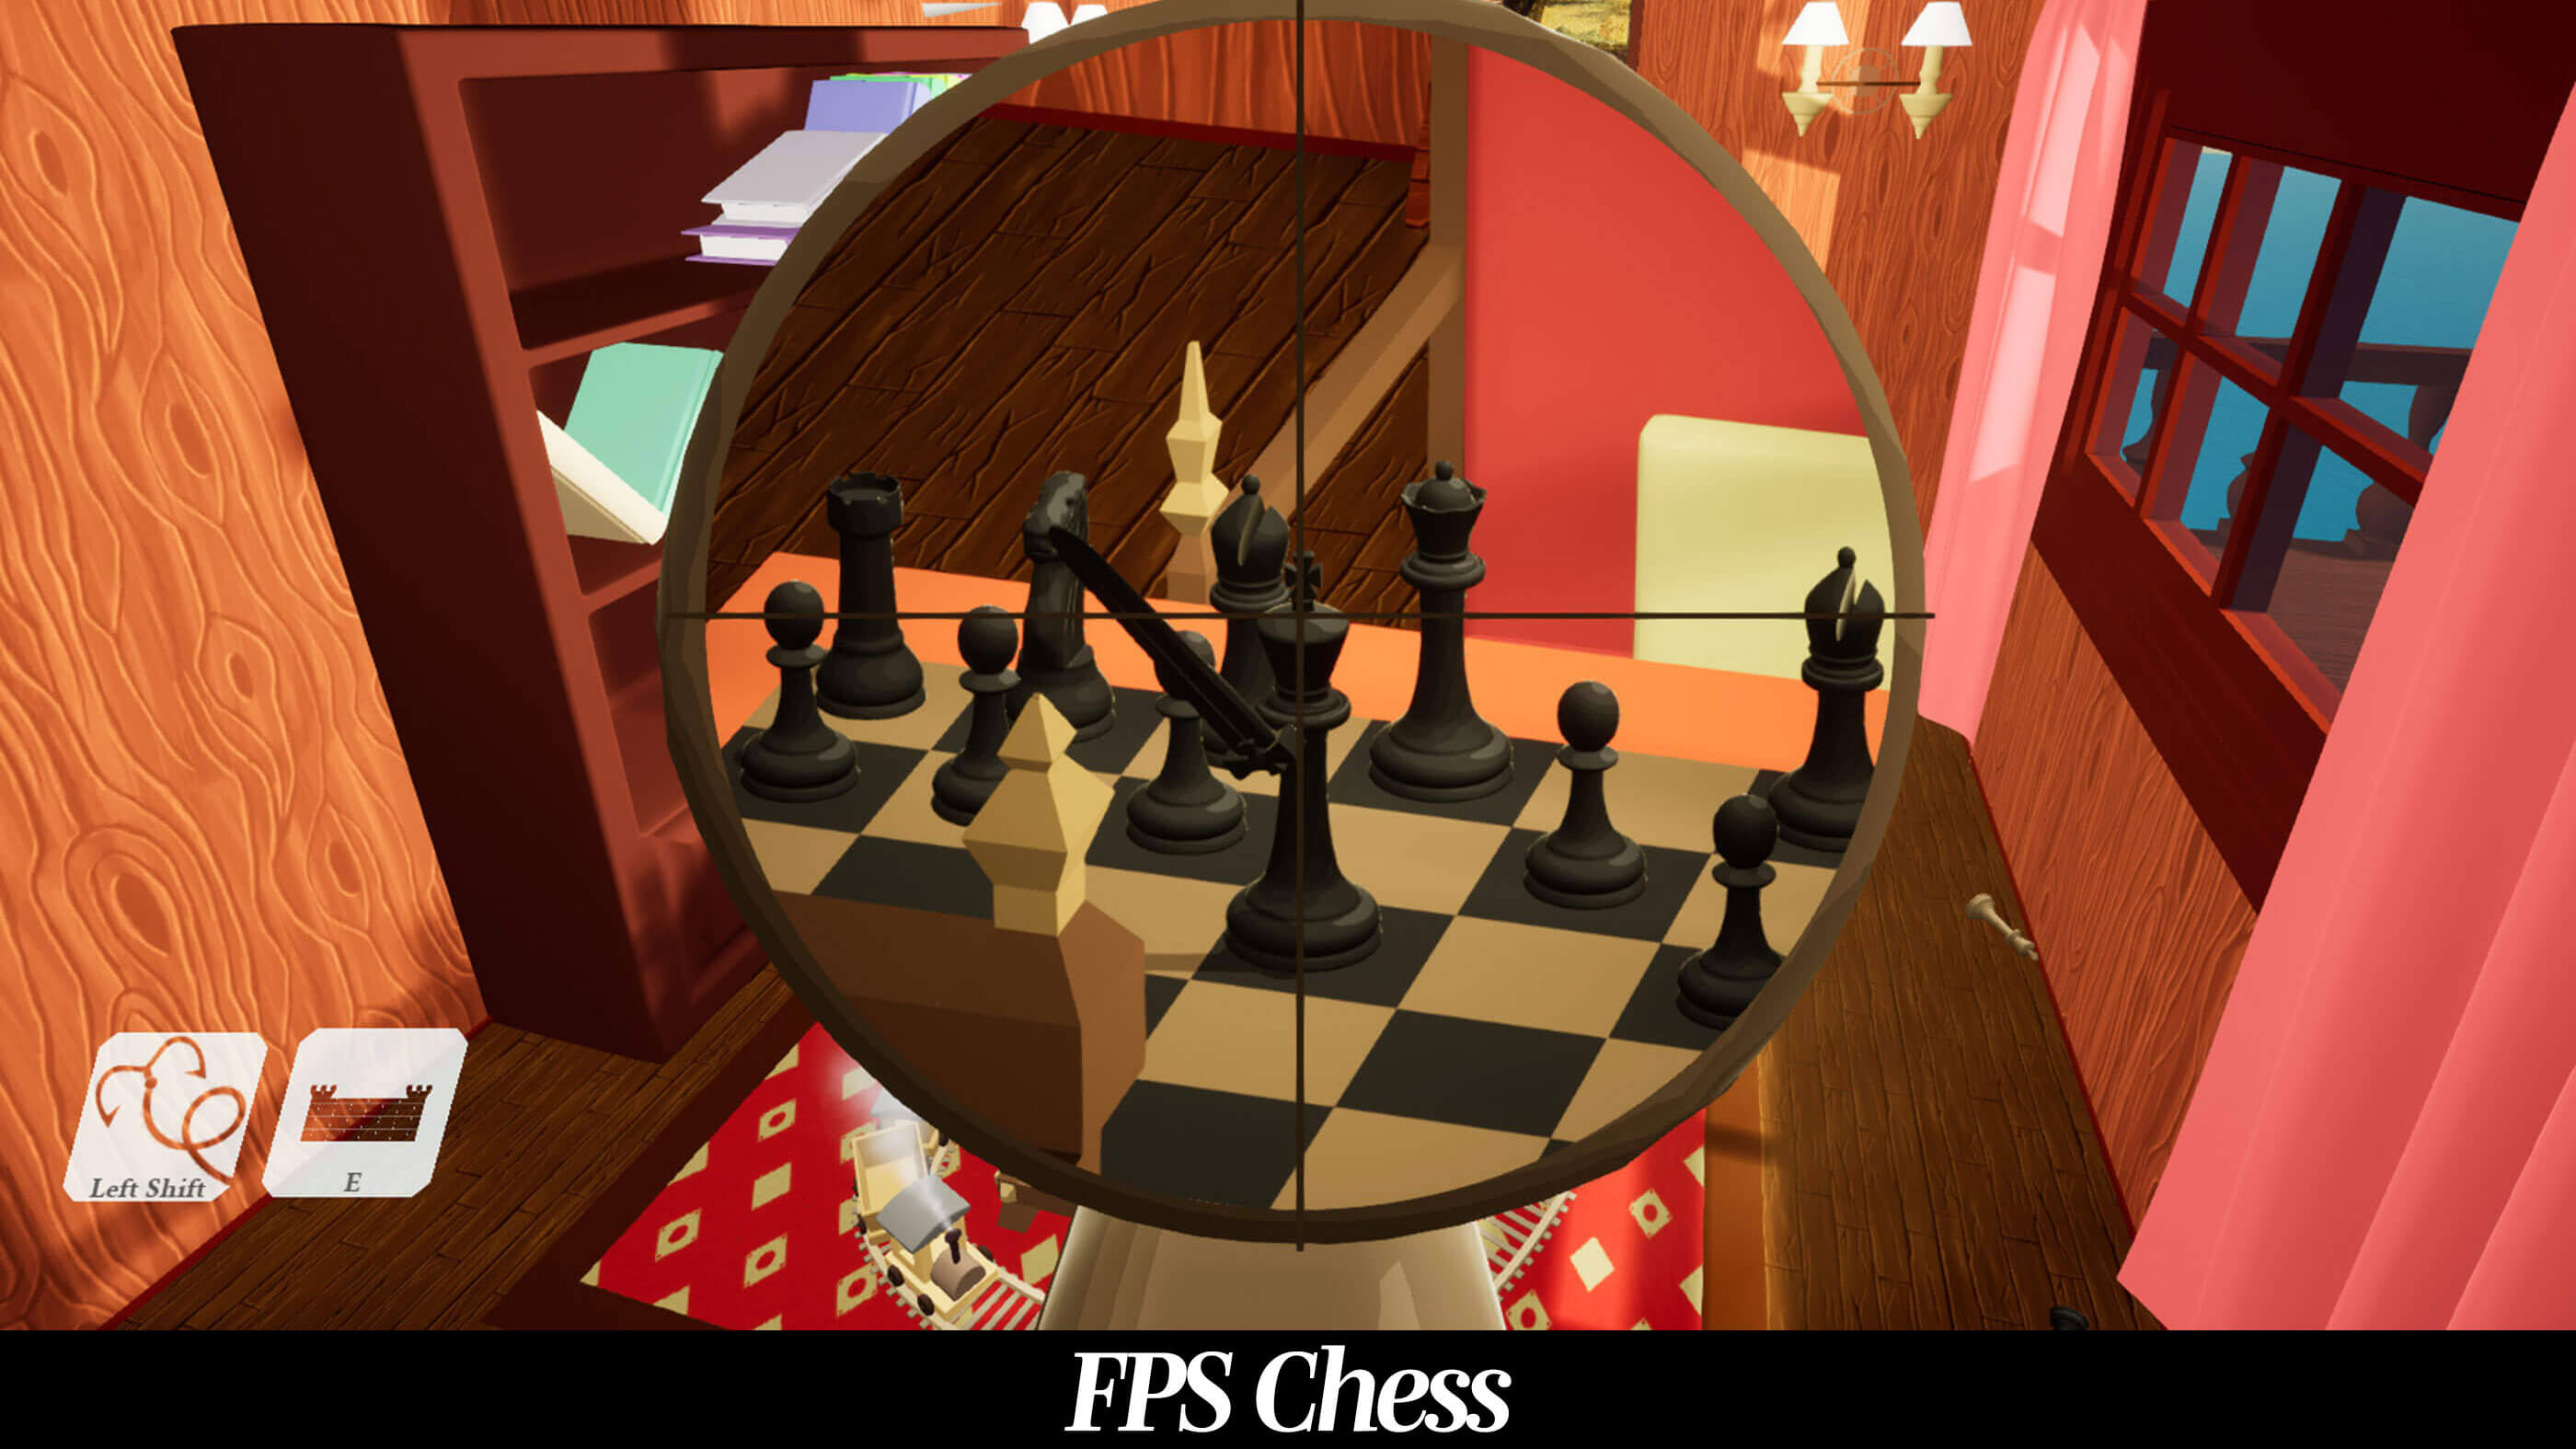 The DigiPen Show ft. Chau Nguyen and Hadi Alhussieni playing student game FPS  Chess.  In a stunning opening move, #DigiPen student game FPS Chess has  captured the #1 spot on Steam's